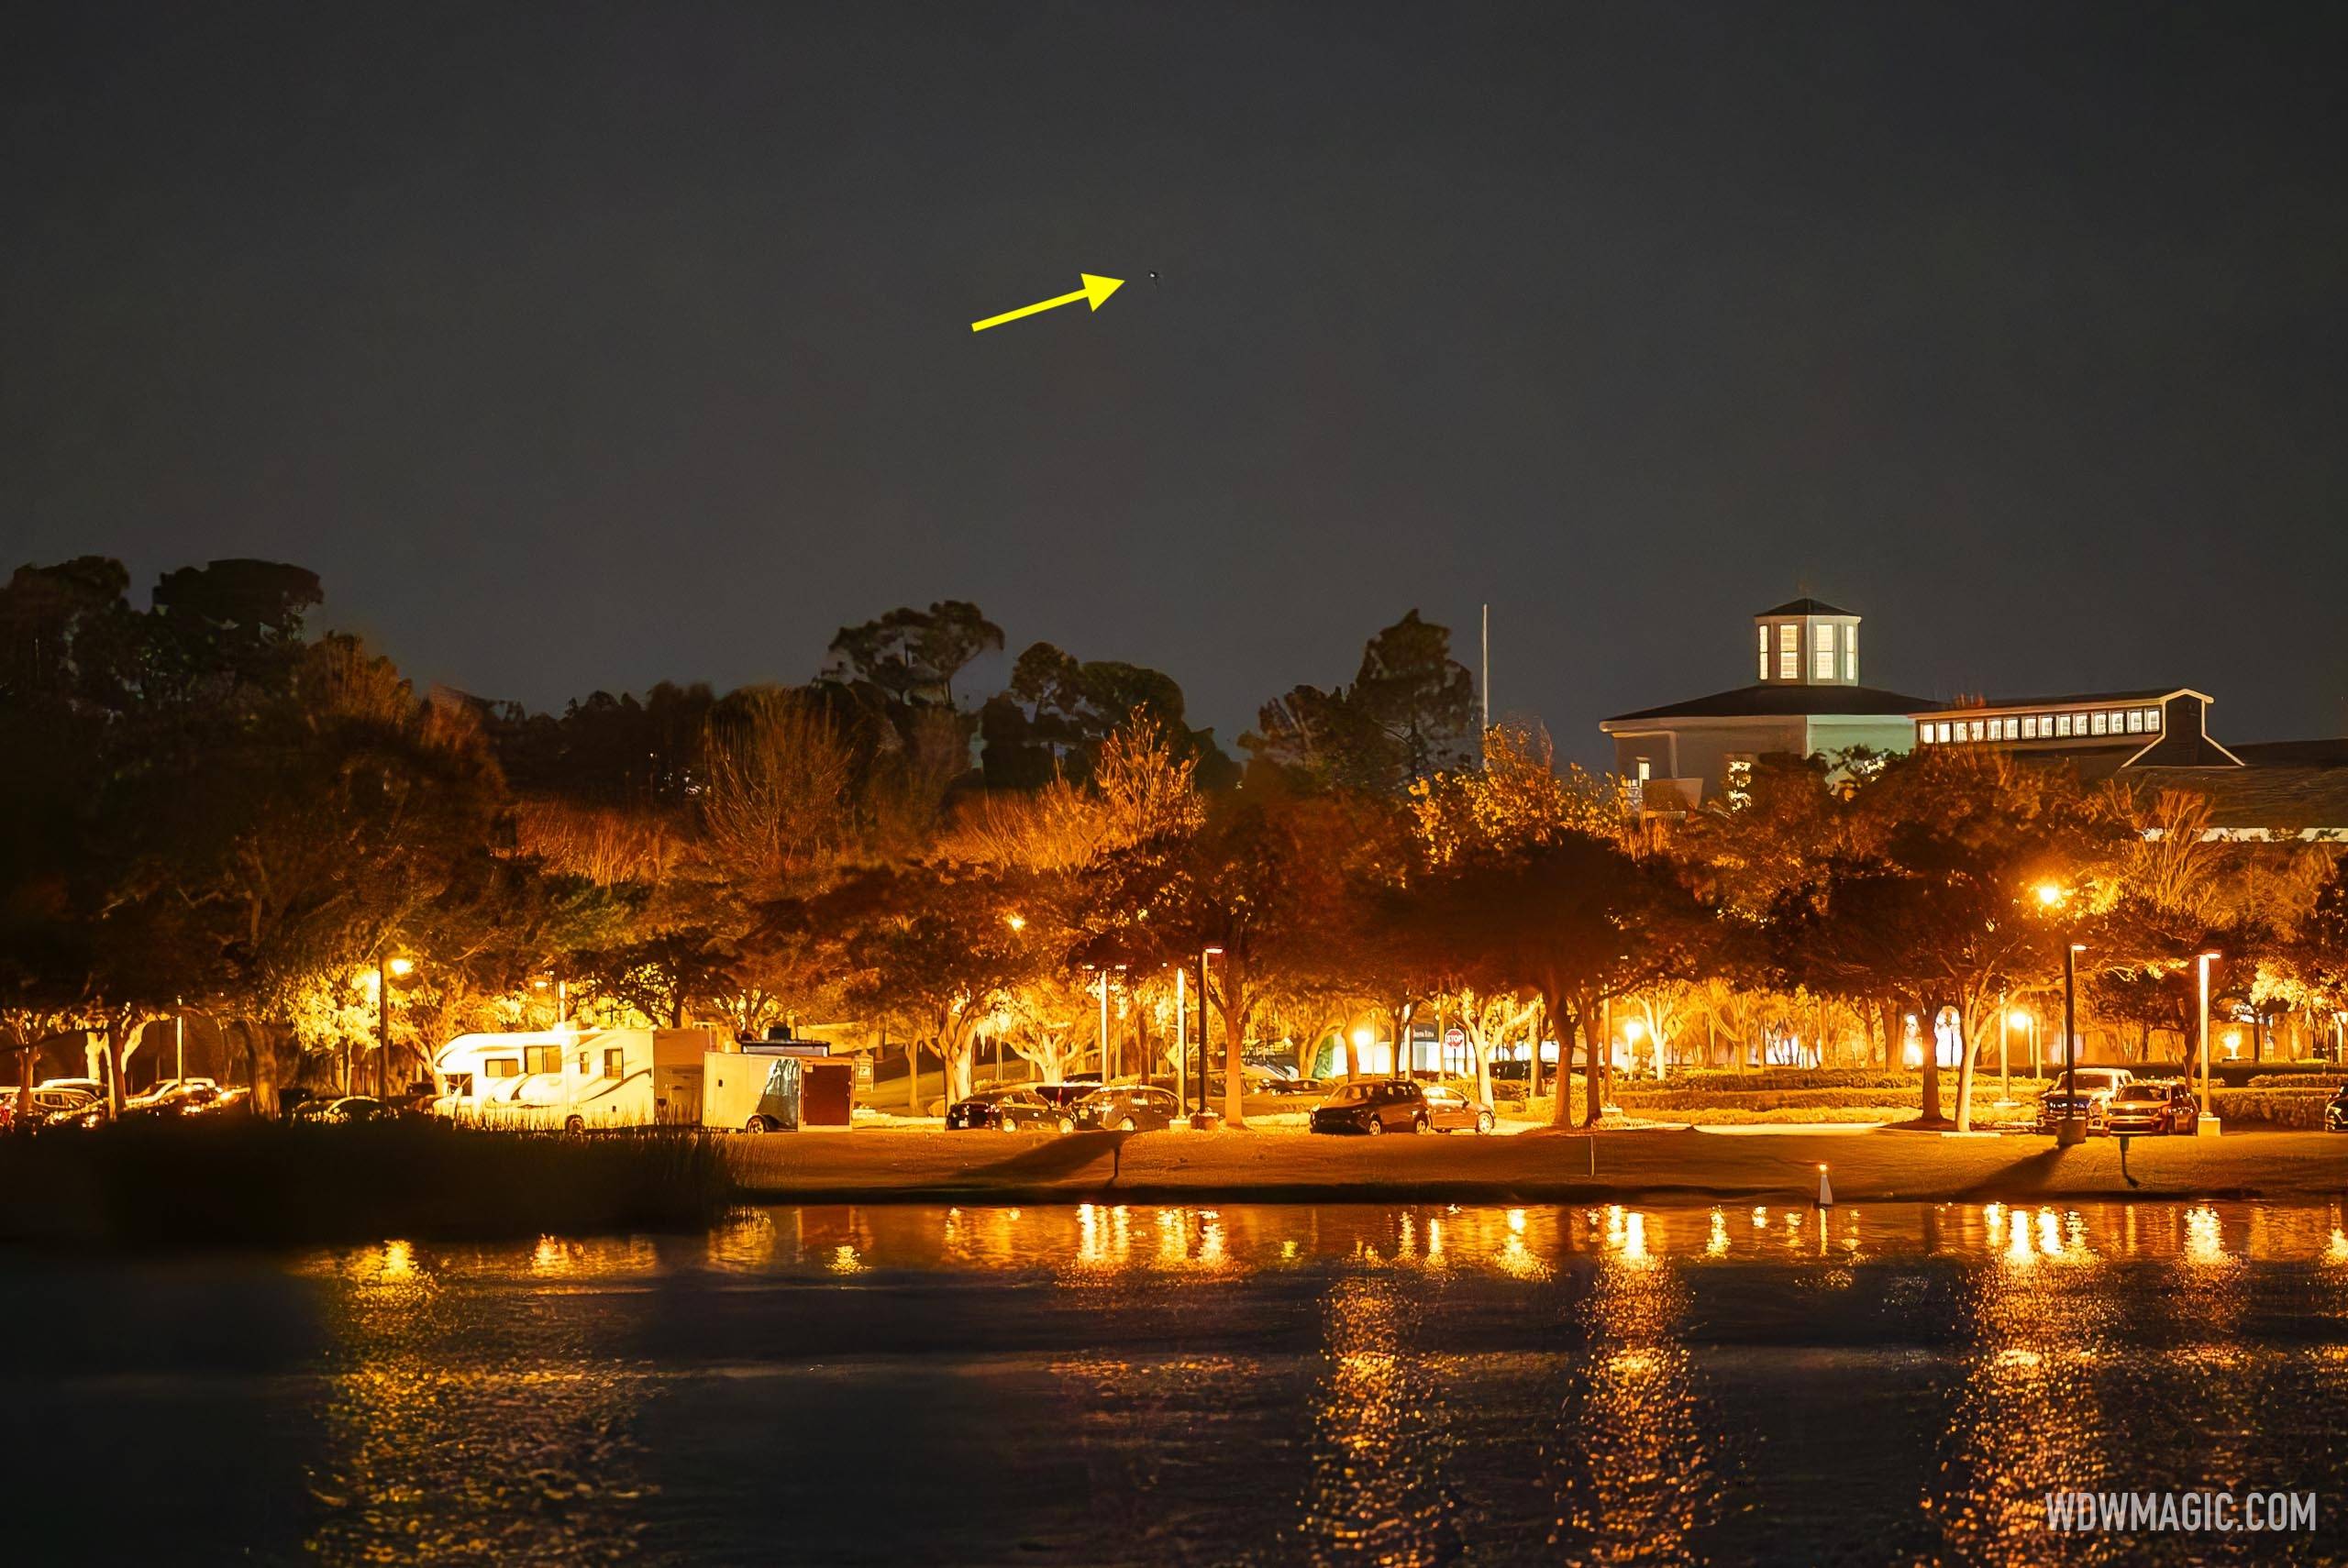 The drone in flight over the Disney Springs lake